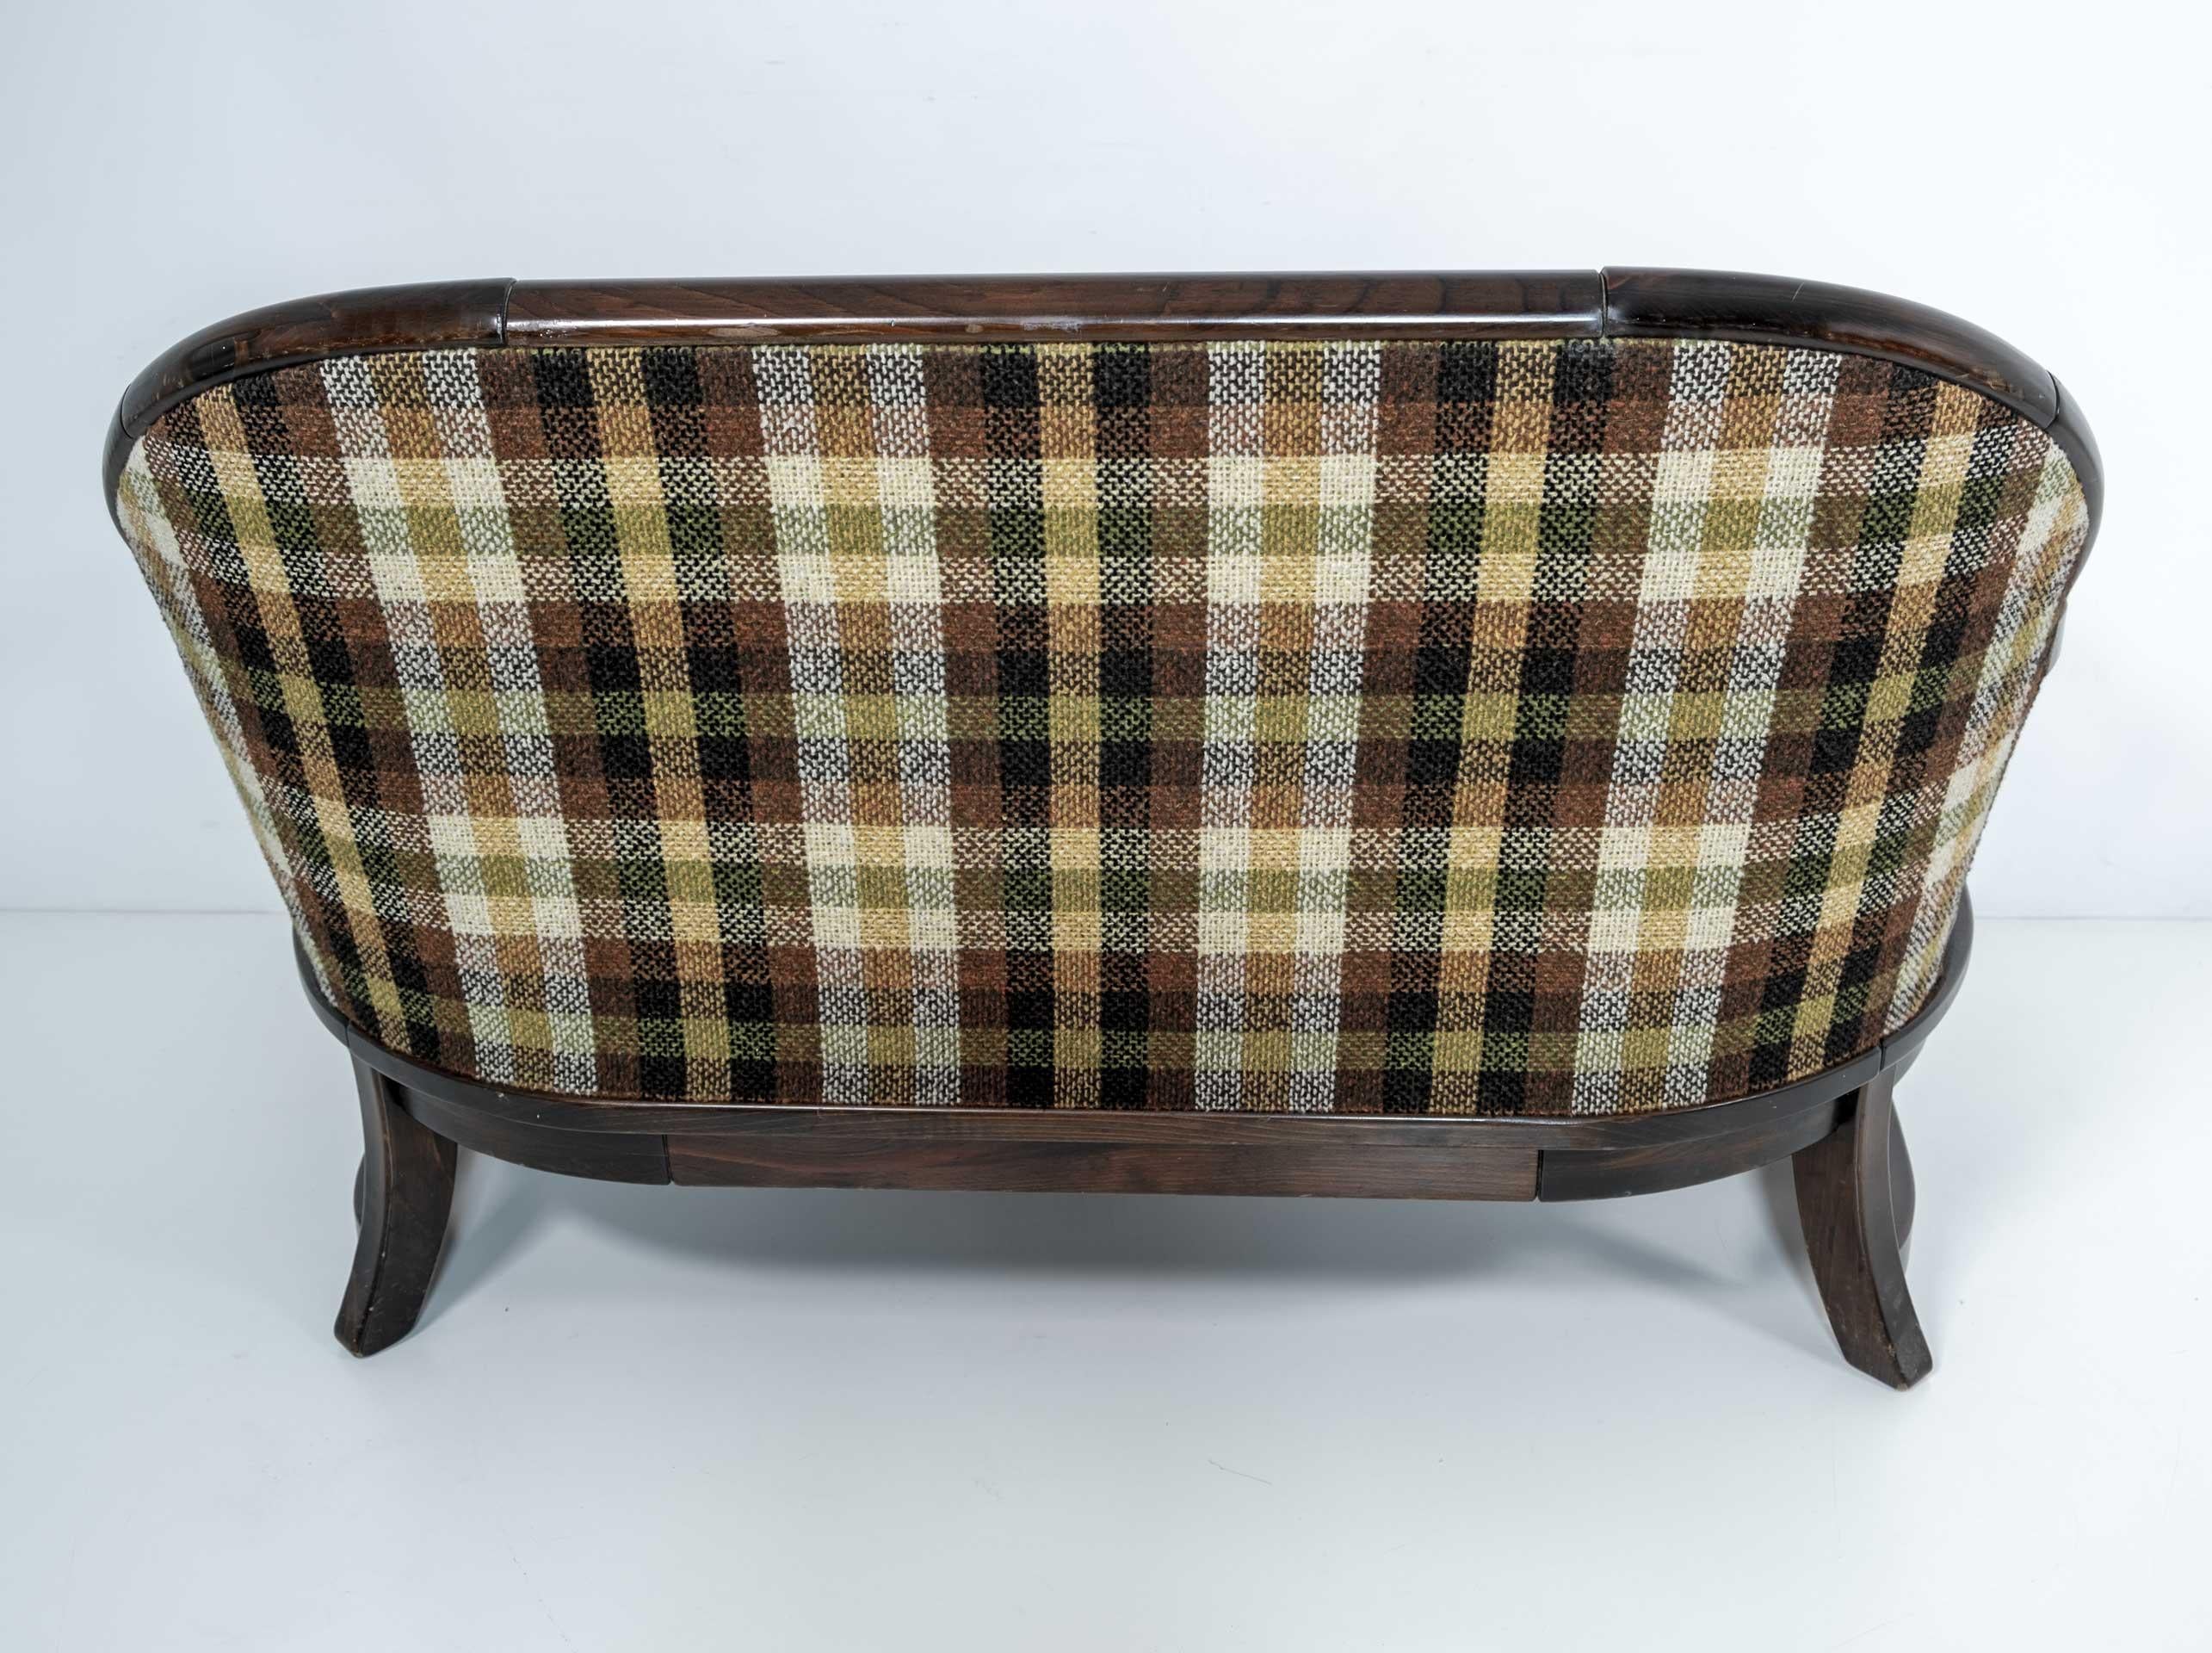 Mid-Century Modern Italian Walnut and Fabric Country Sofa by Pizzetti Roma, 70s For Sale 4